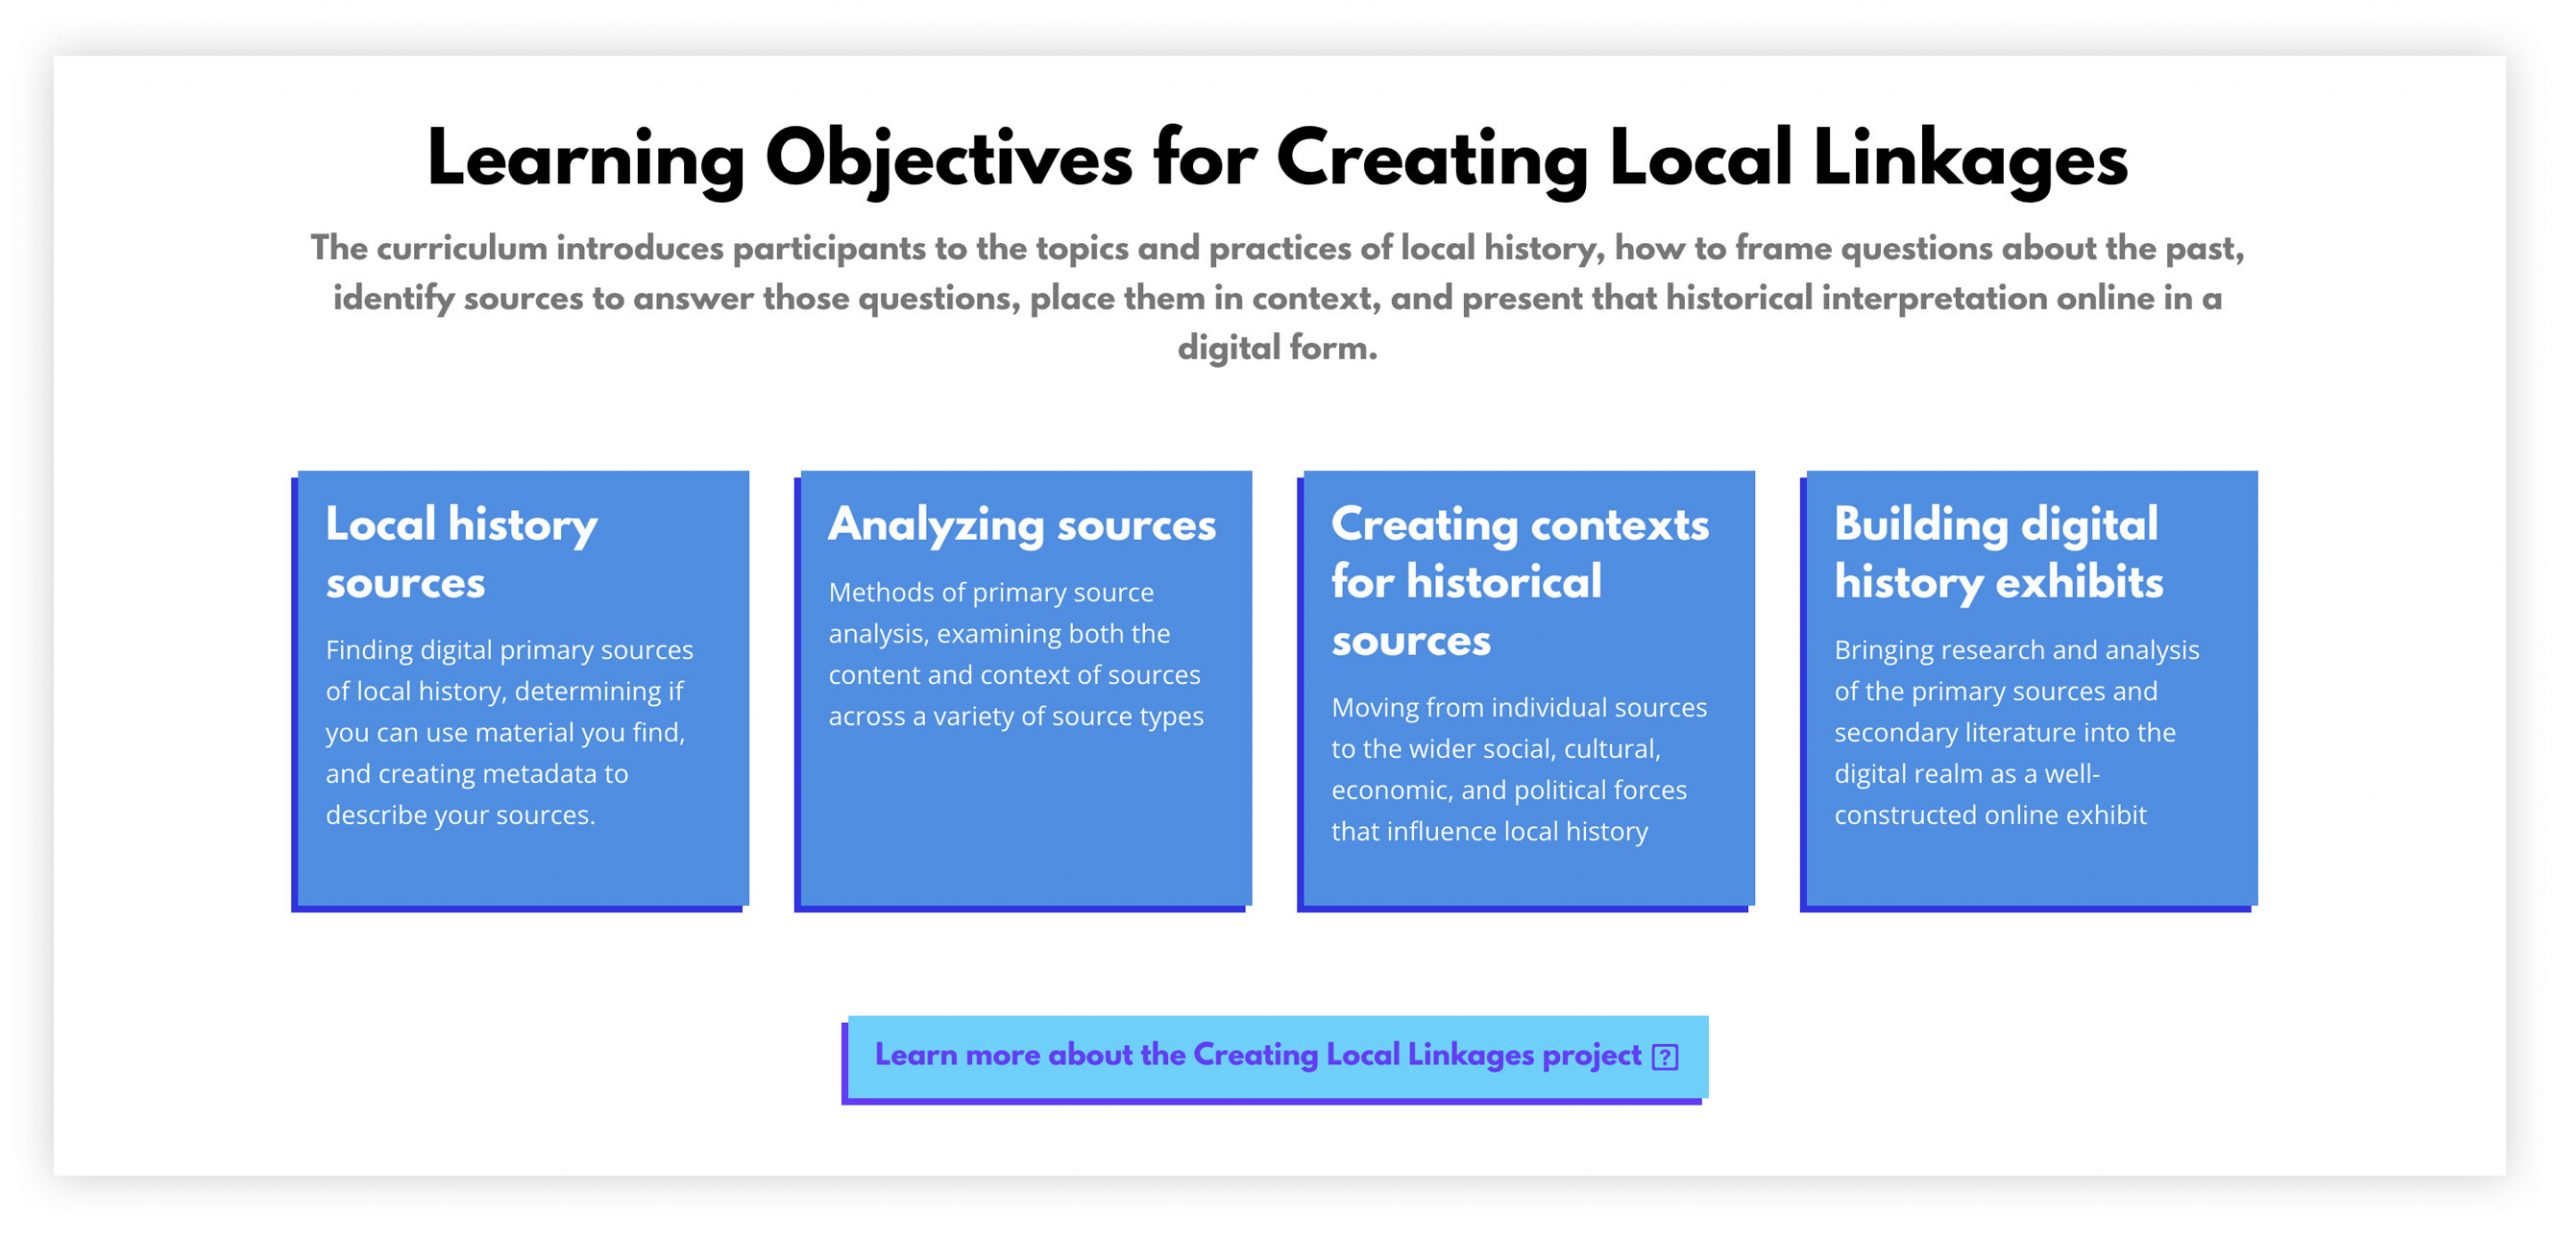 Screengrab of the Creating Local Linkages website which reads, "Learning Objectives for Creating Local Linkages — The curriculum introduces participants to the topics and practices of local history, how to frame questions about the past, identify sources to answer those questions, place them in context, and present that historical interpretation online in a digital form."